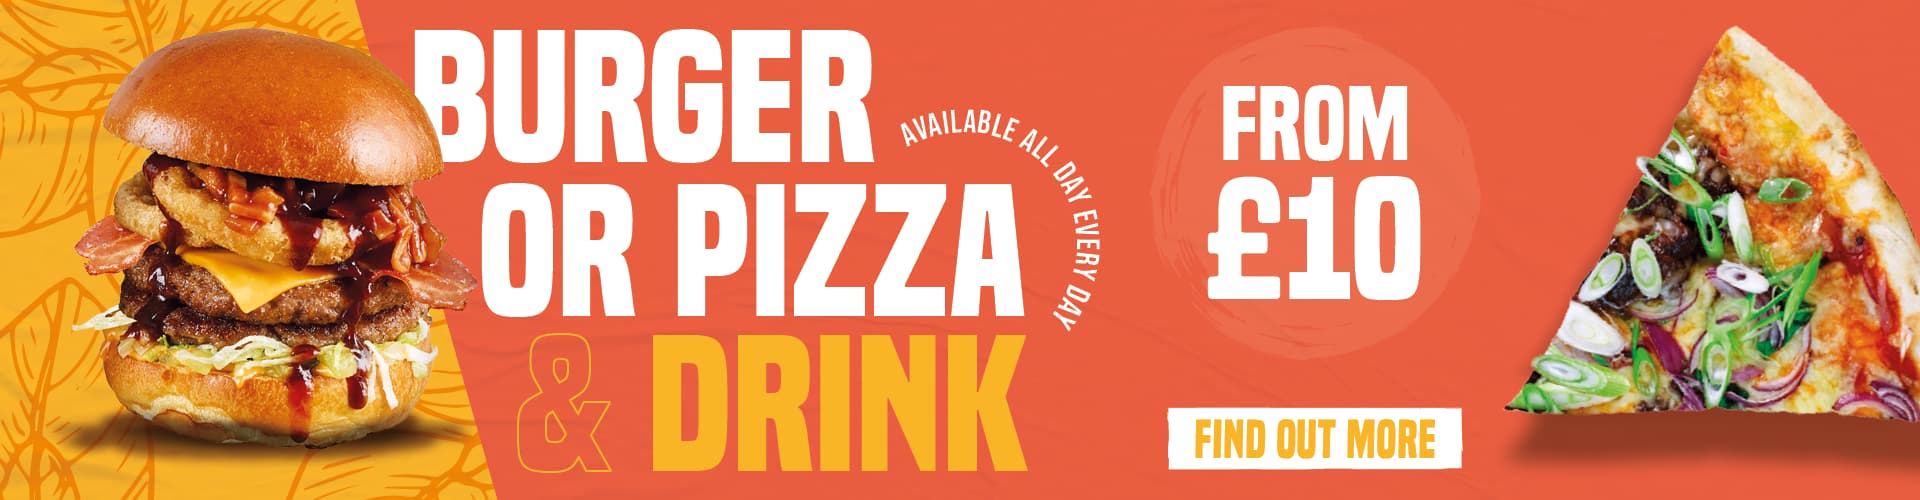 Burger or Pizza & Drink - Available All Day Every Day From £10. Find Out More!